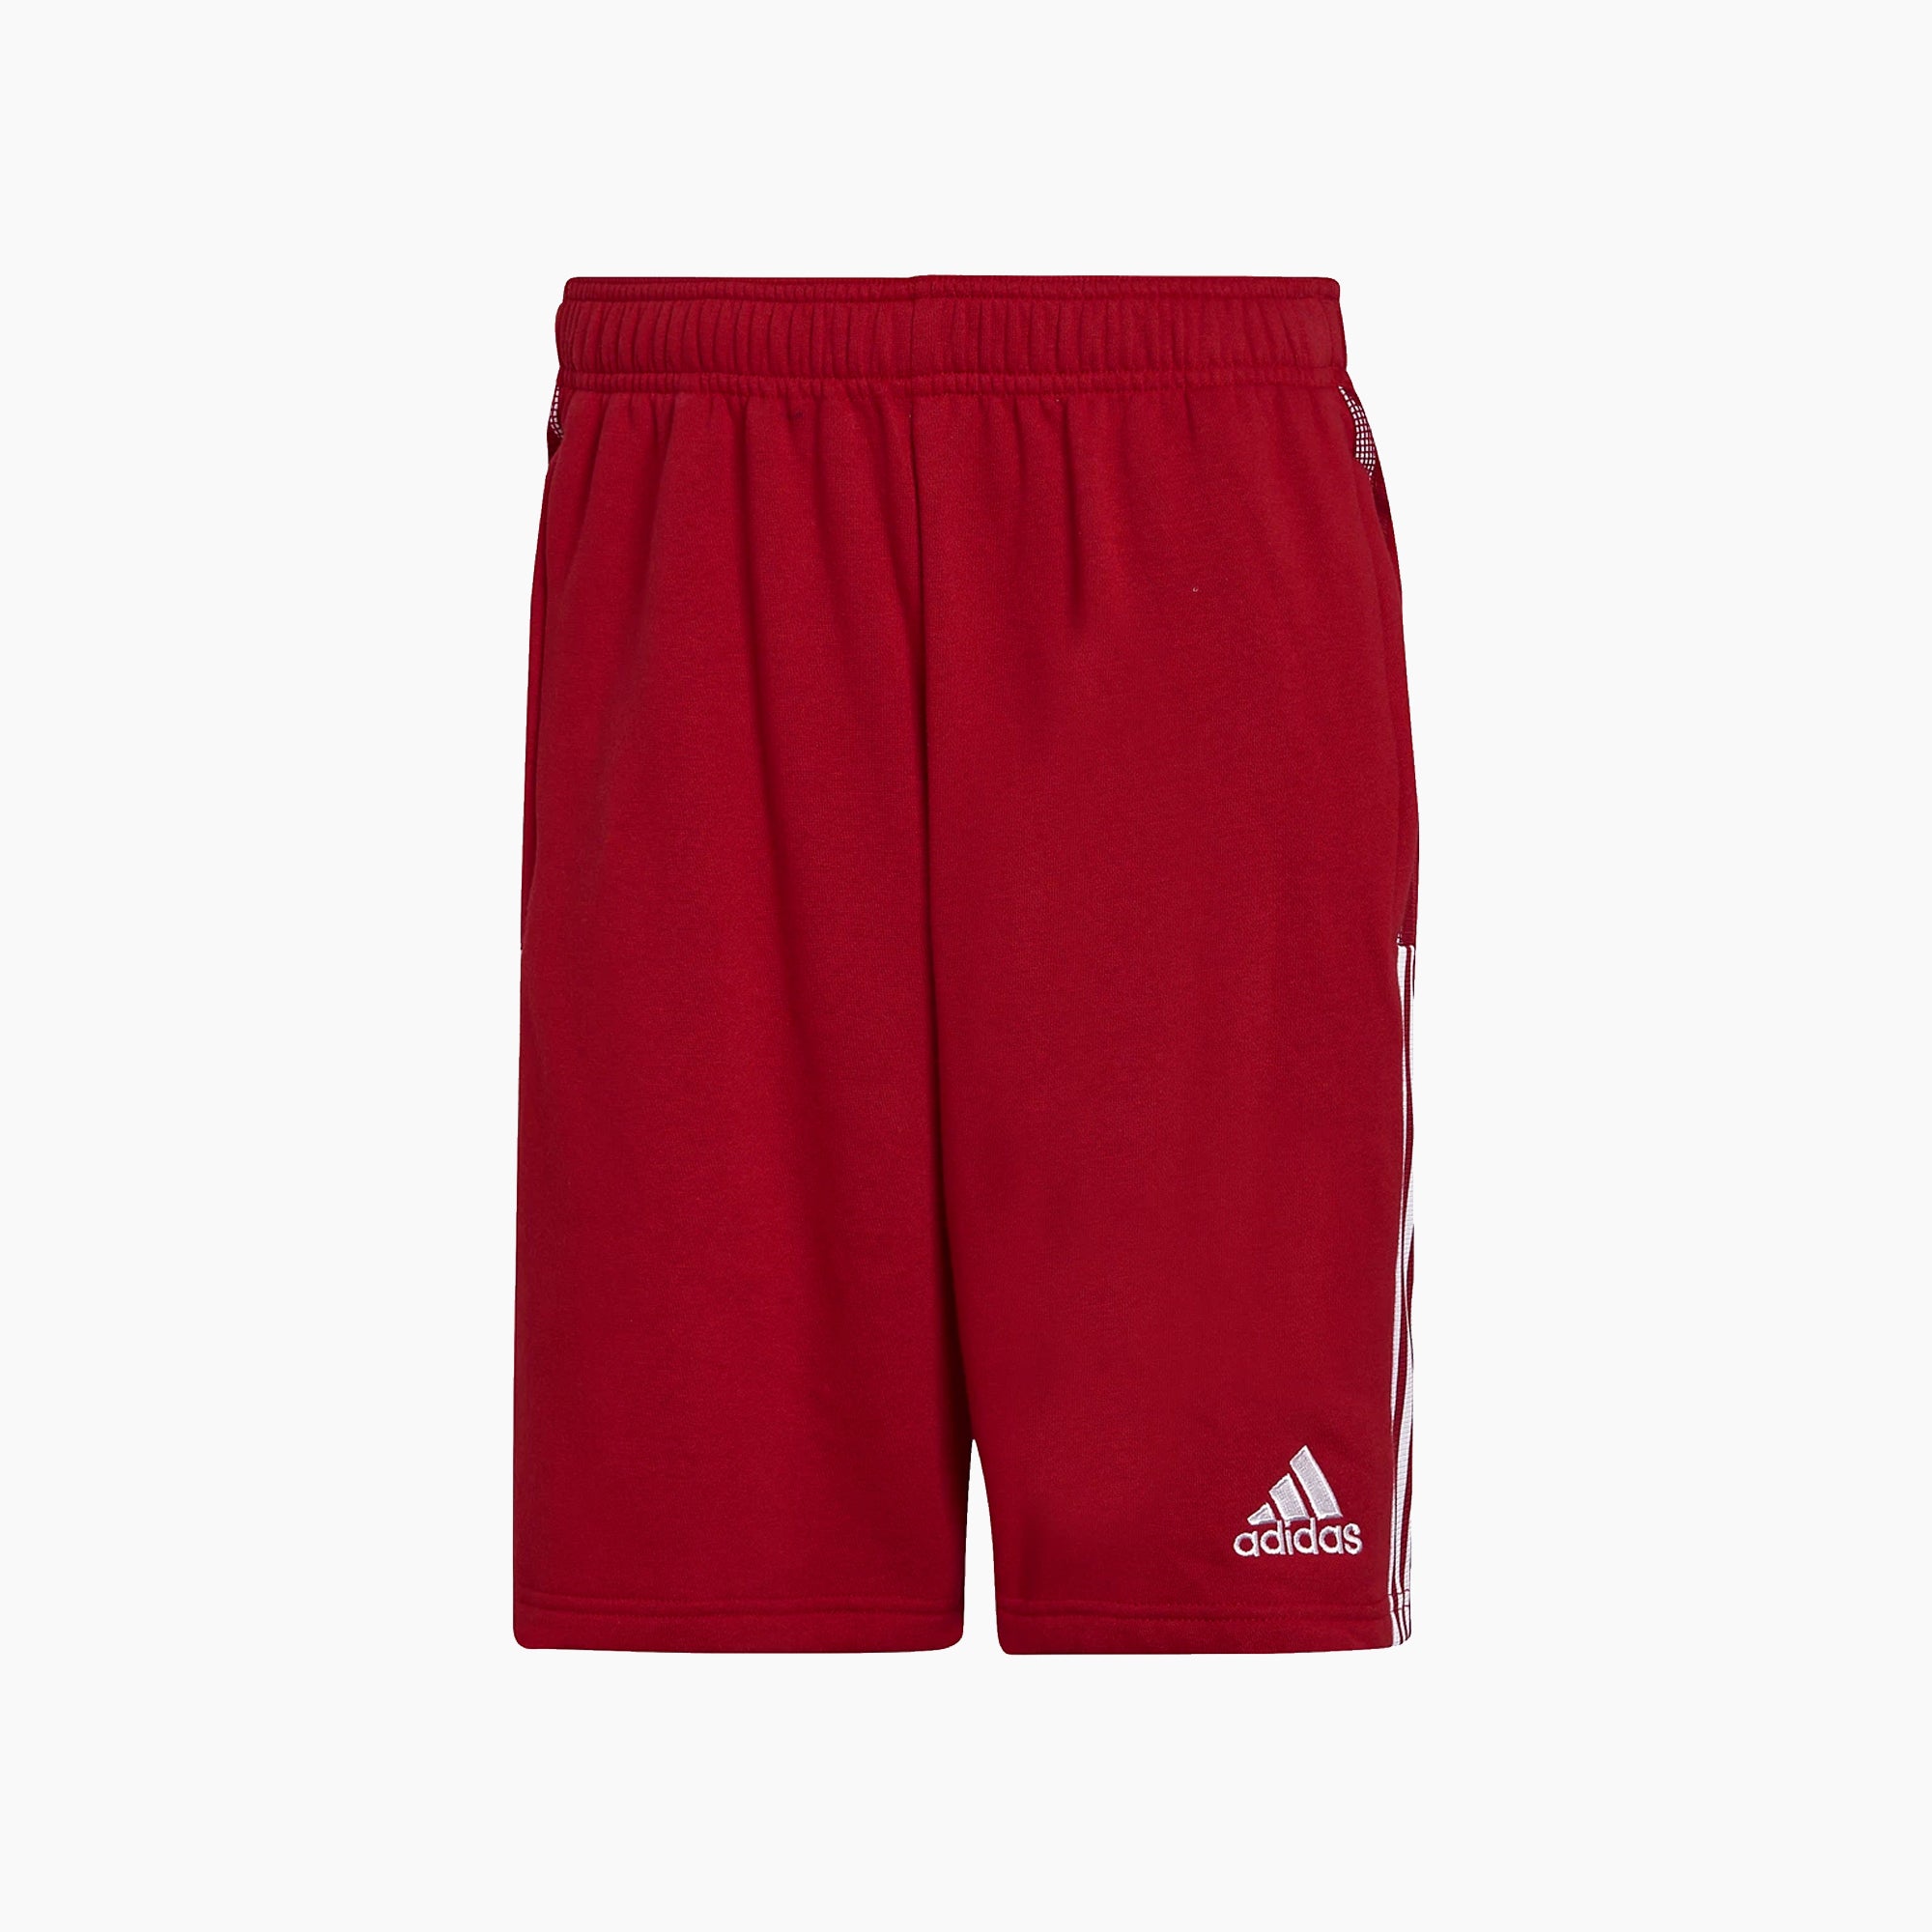 Adidas Men's Shorts - Red - S